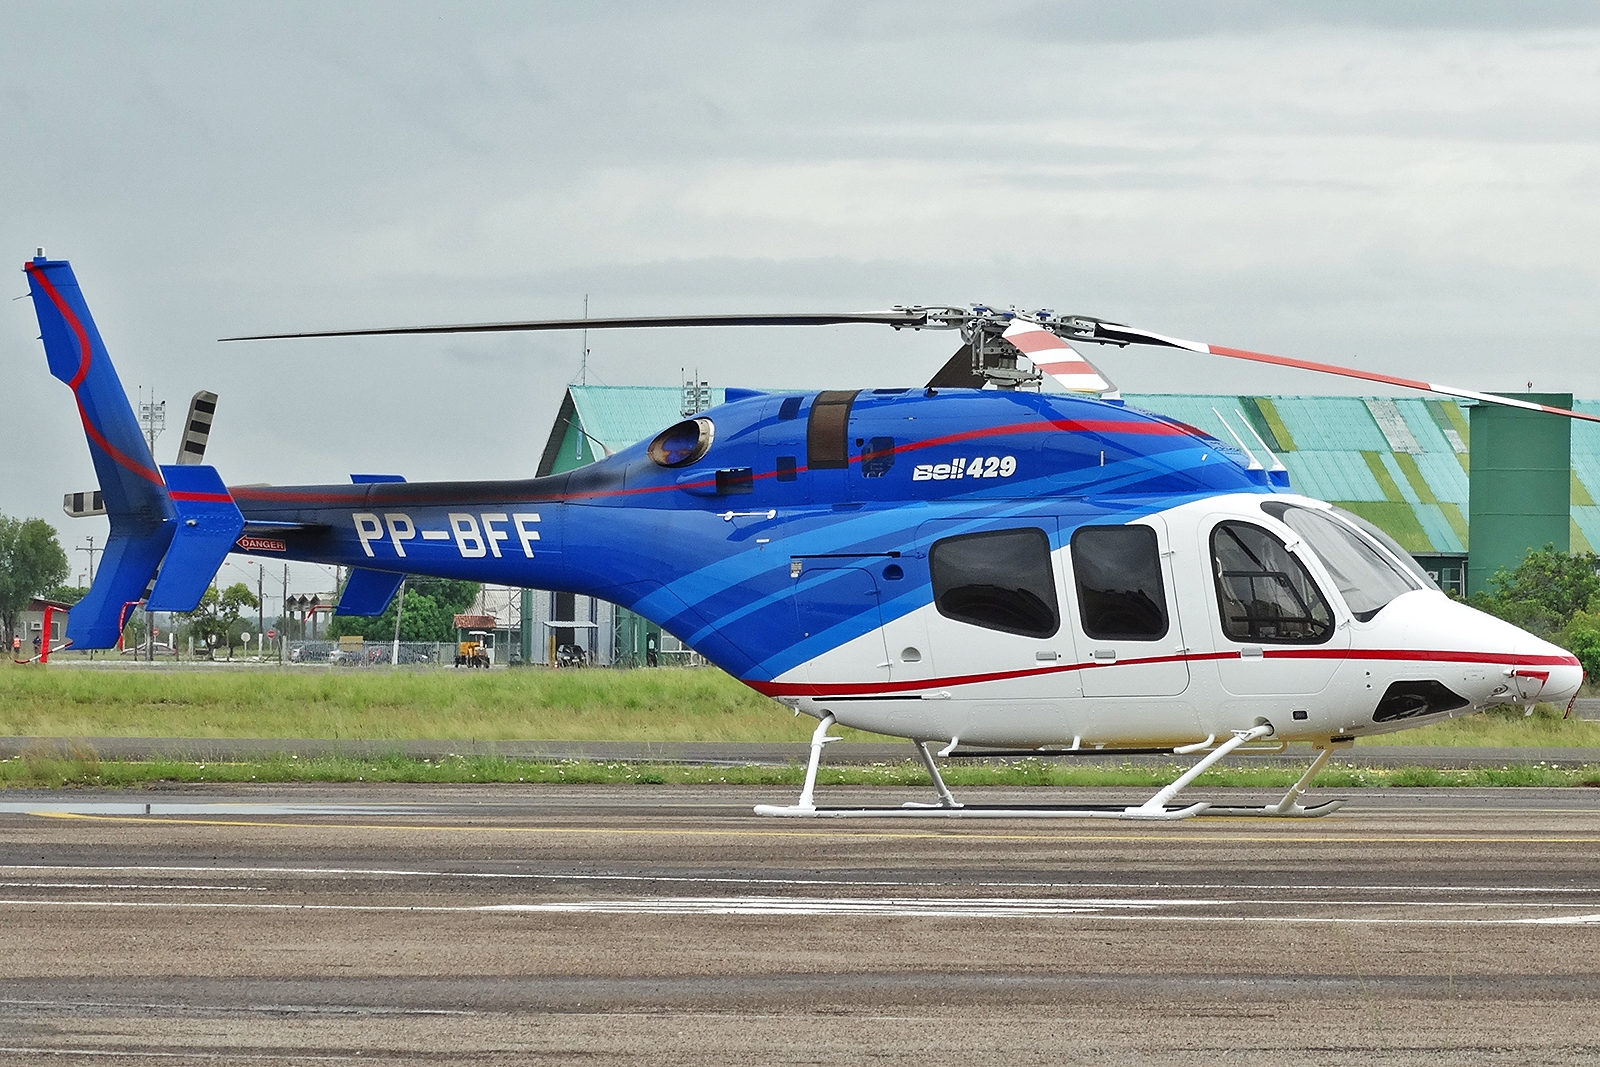 PP-BFF - BELL 429